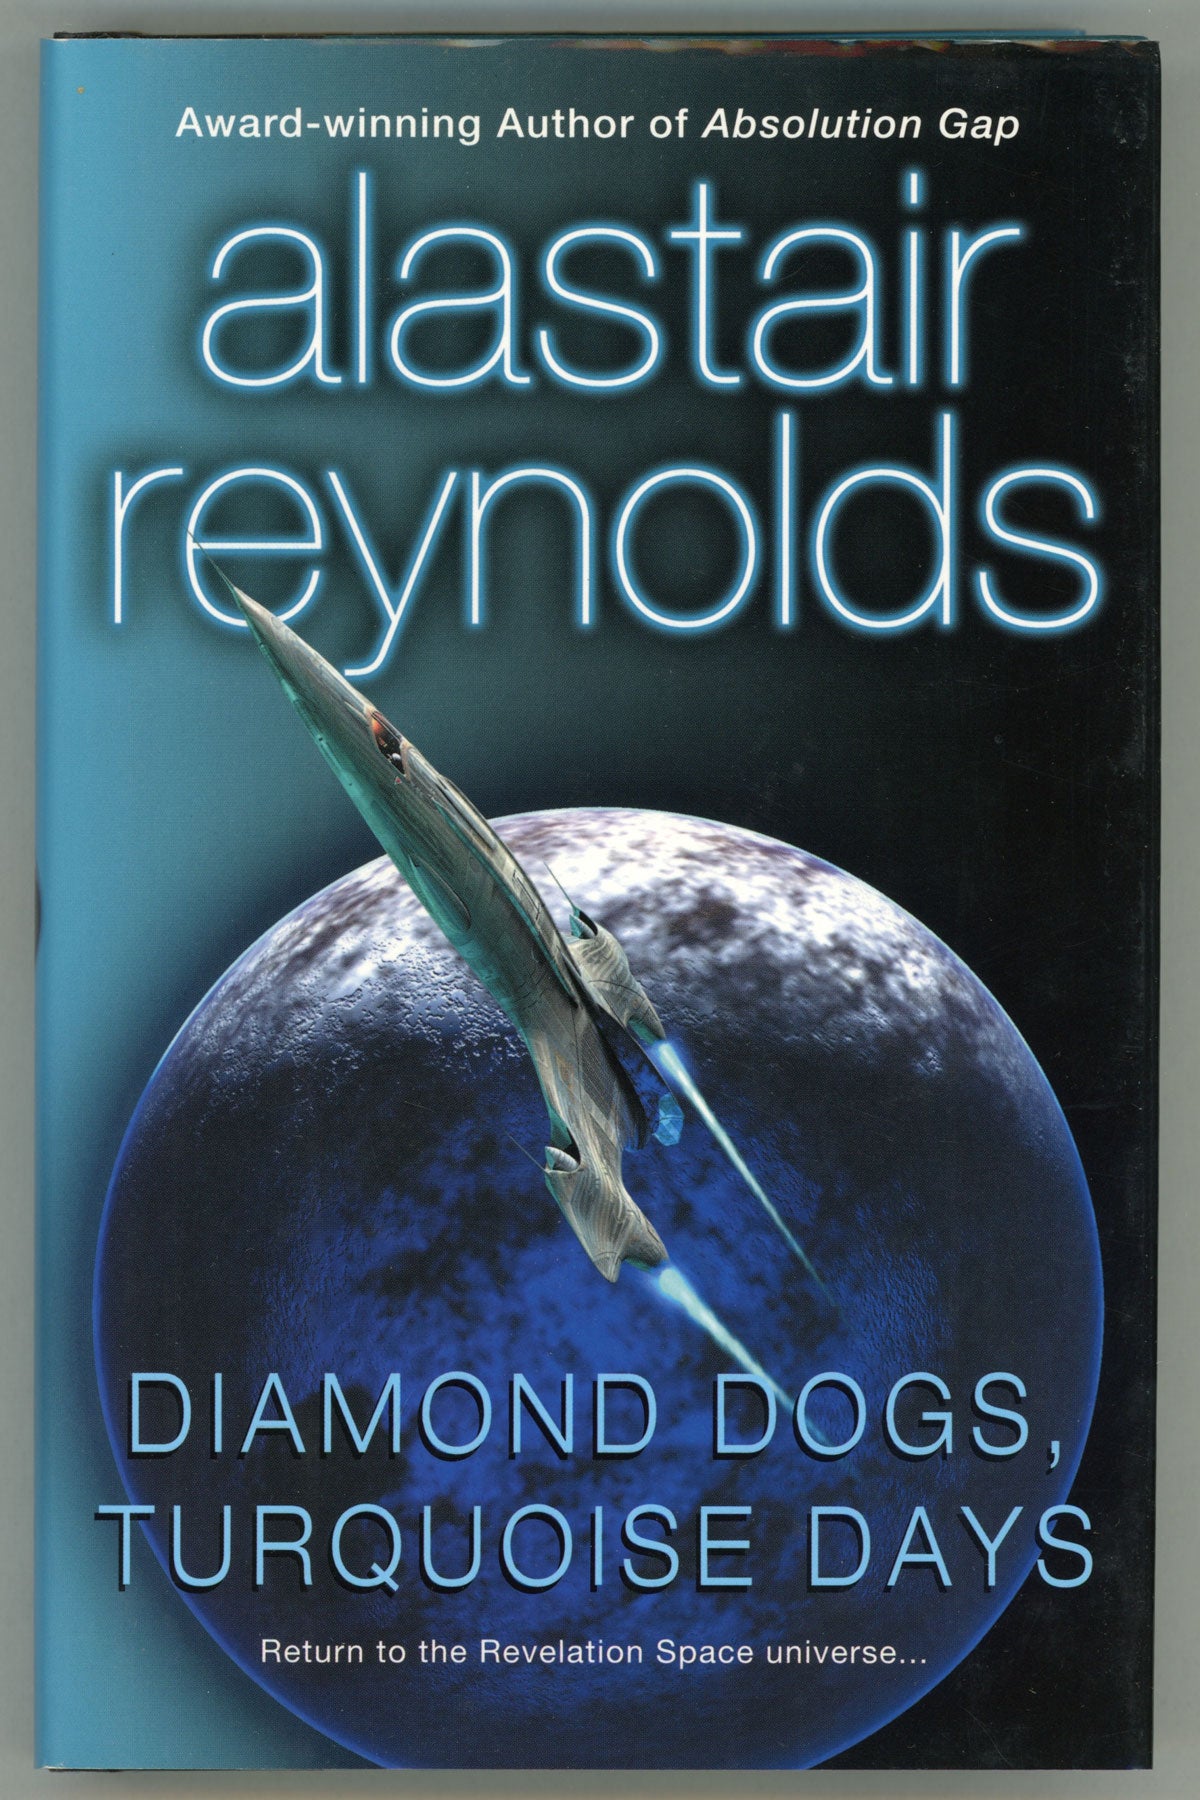 MY ALASTAIR REYNOLDS BOOK COLLECTION 